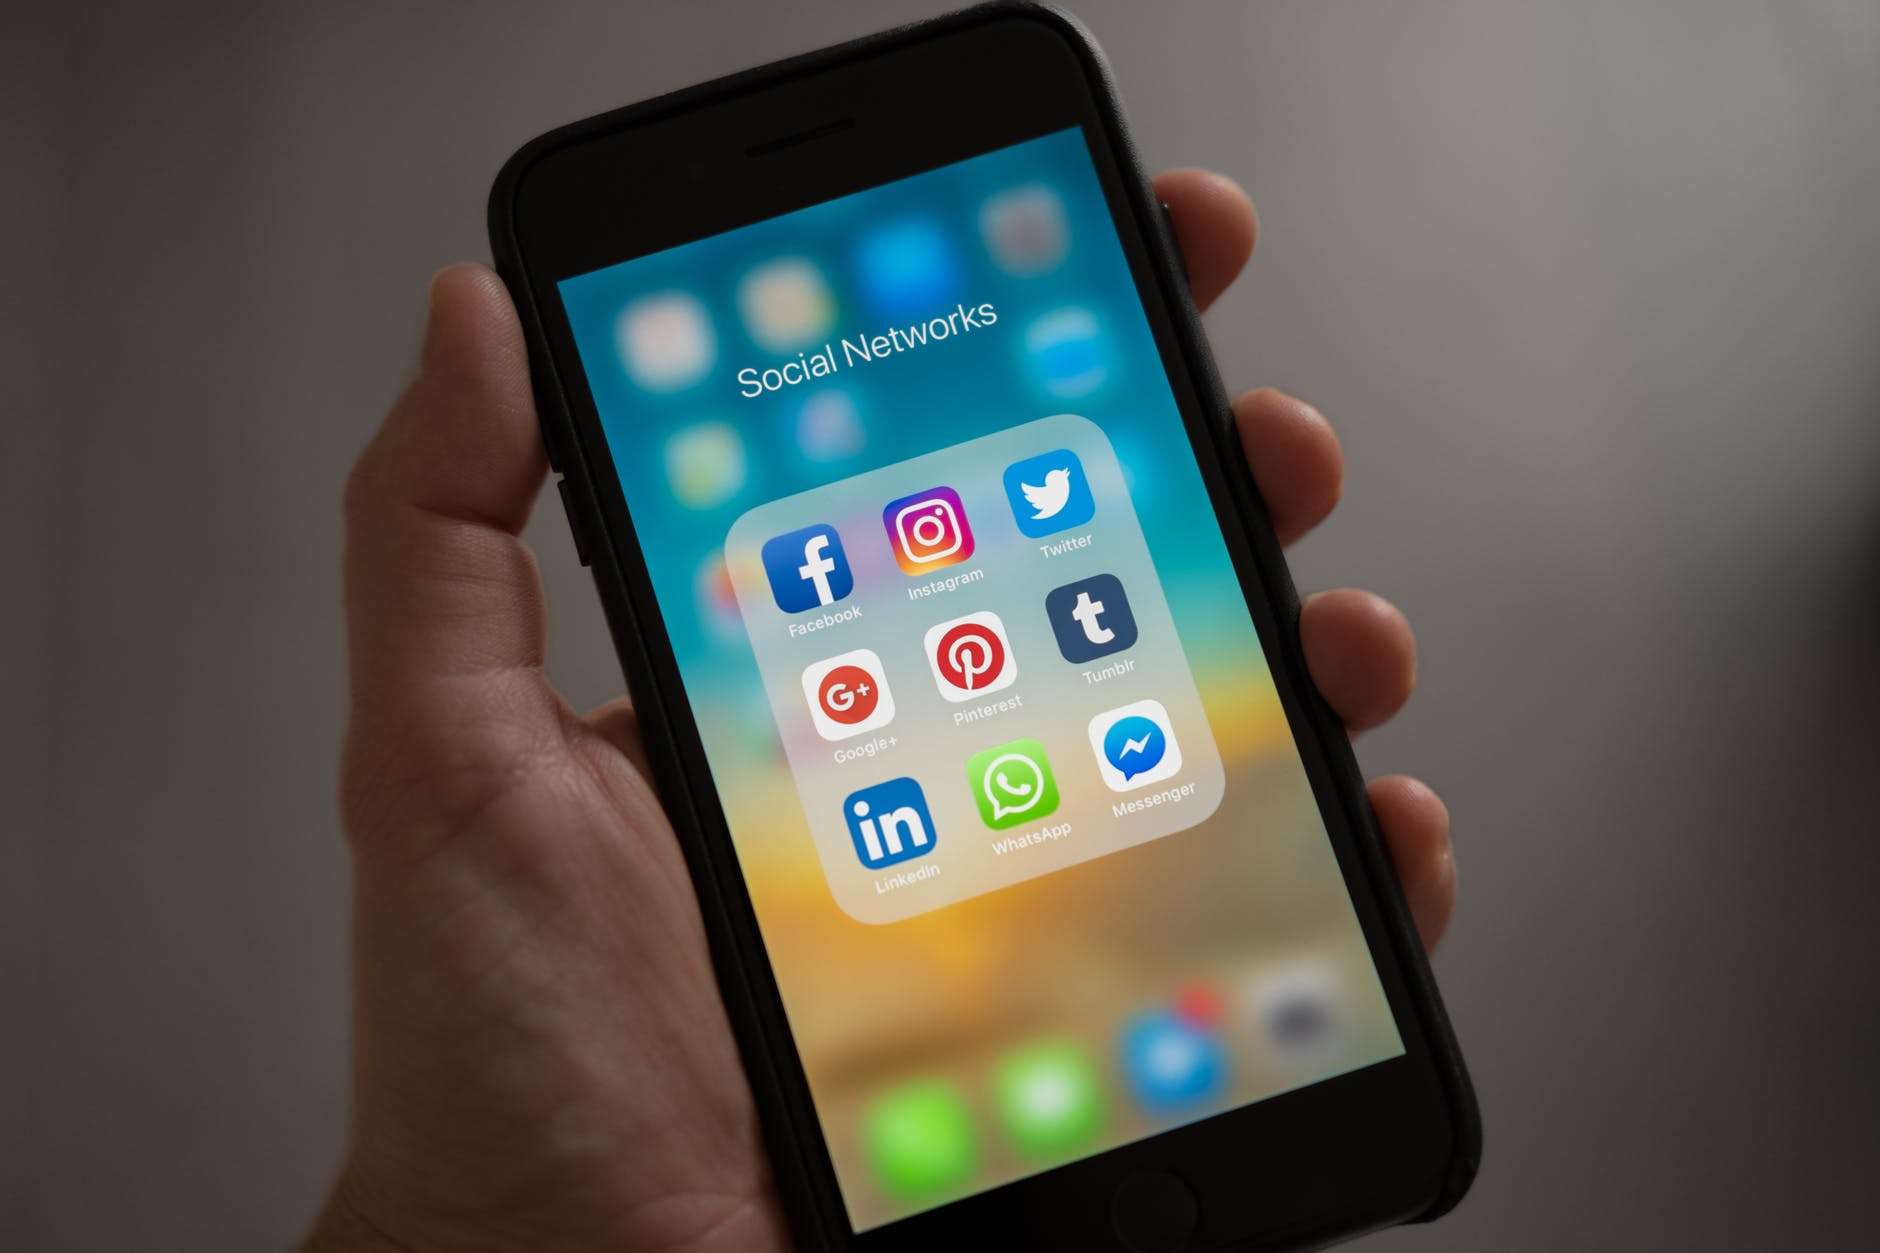 Most people can't live without their social media these days. Decide how often and from where you need to post to help determine how best to use your phone abroad.